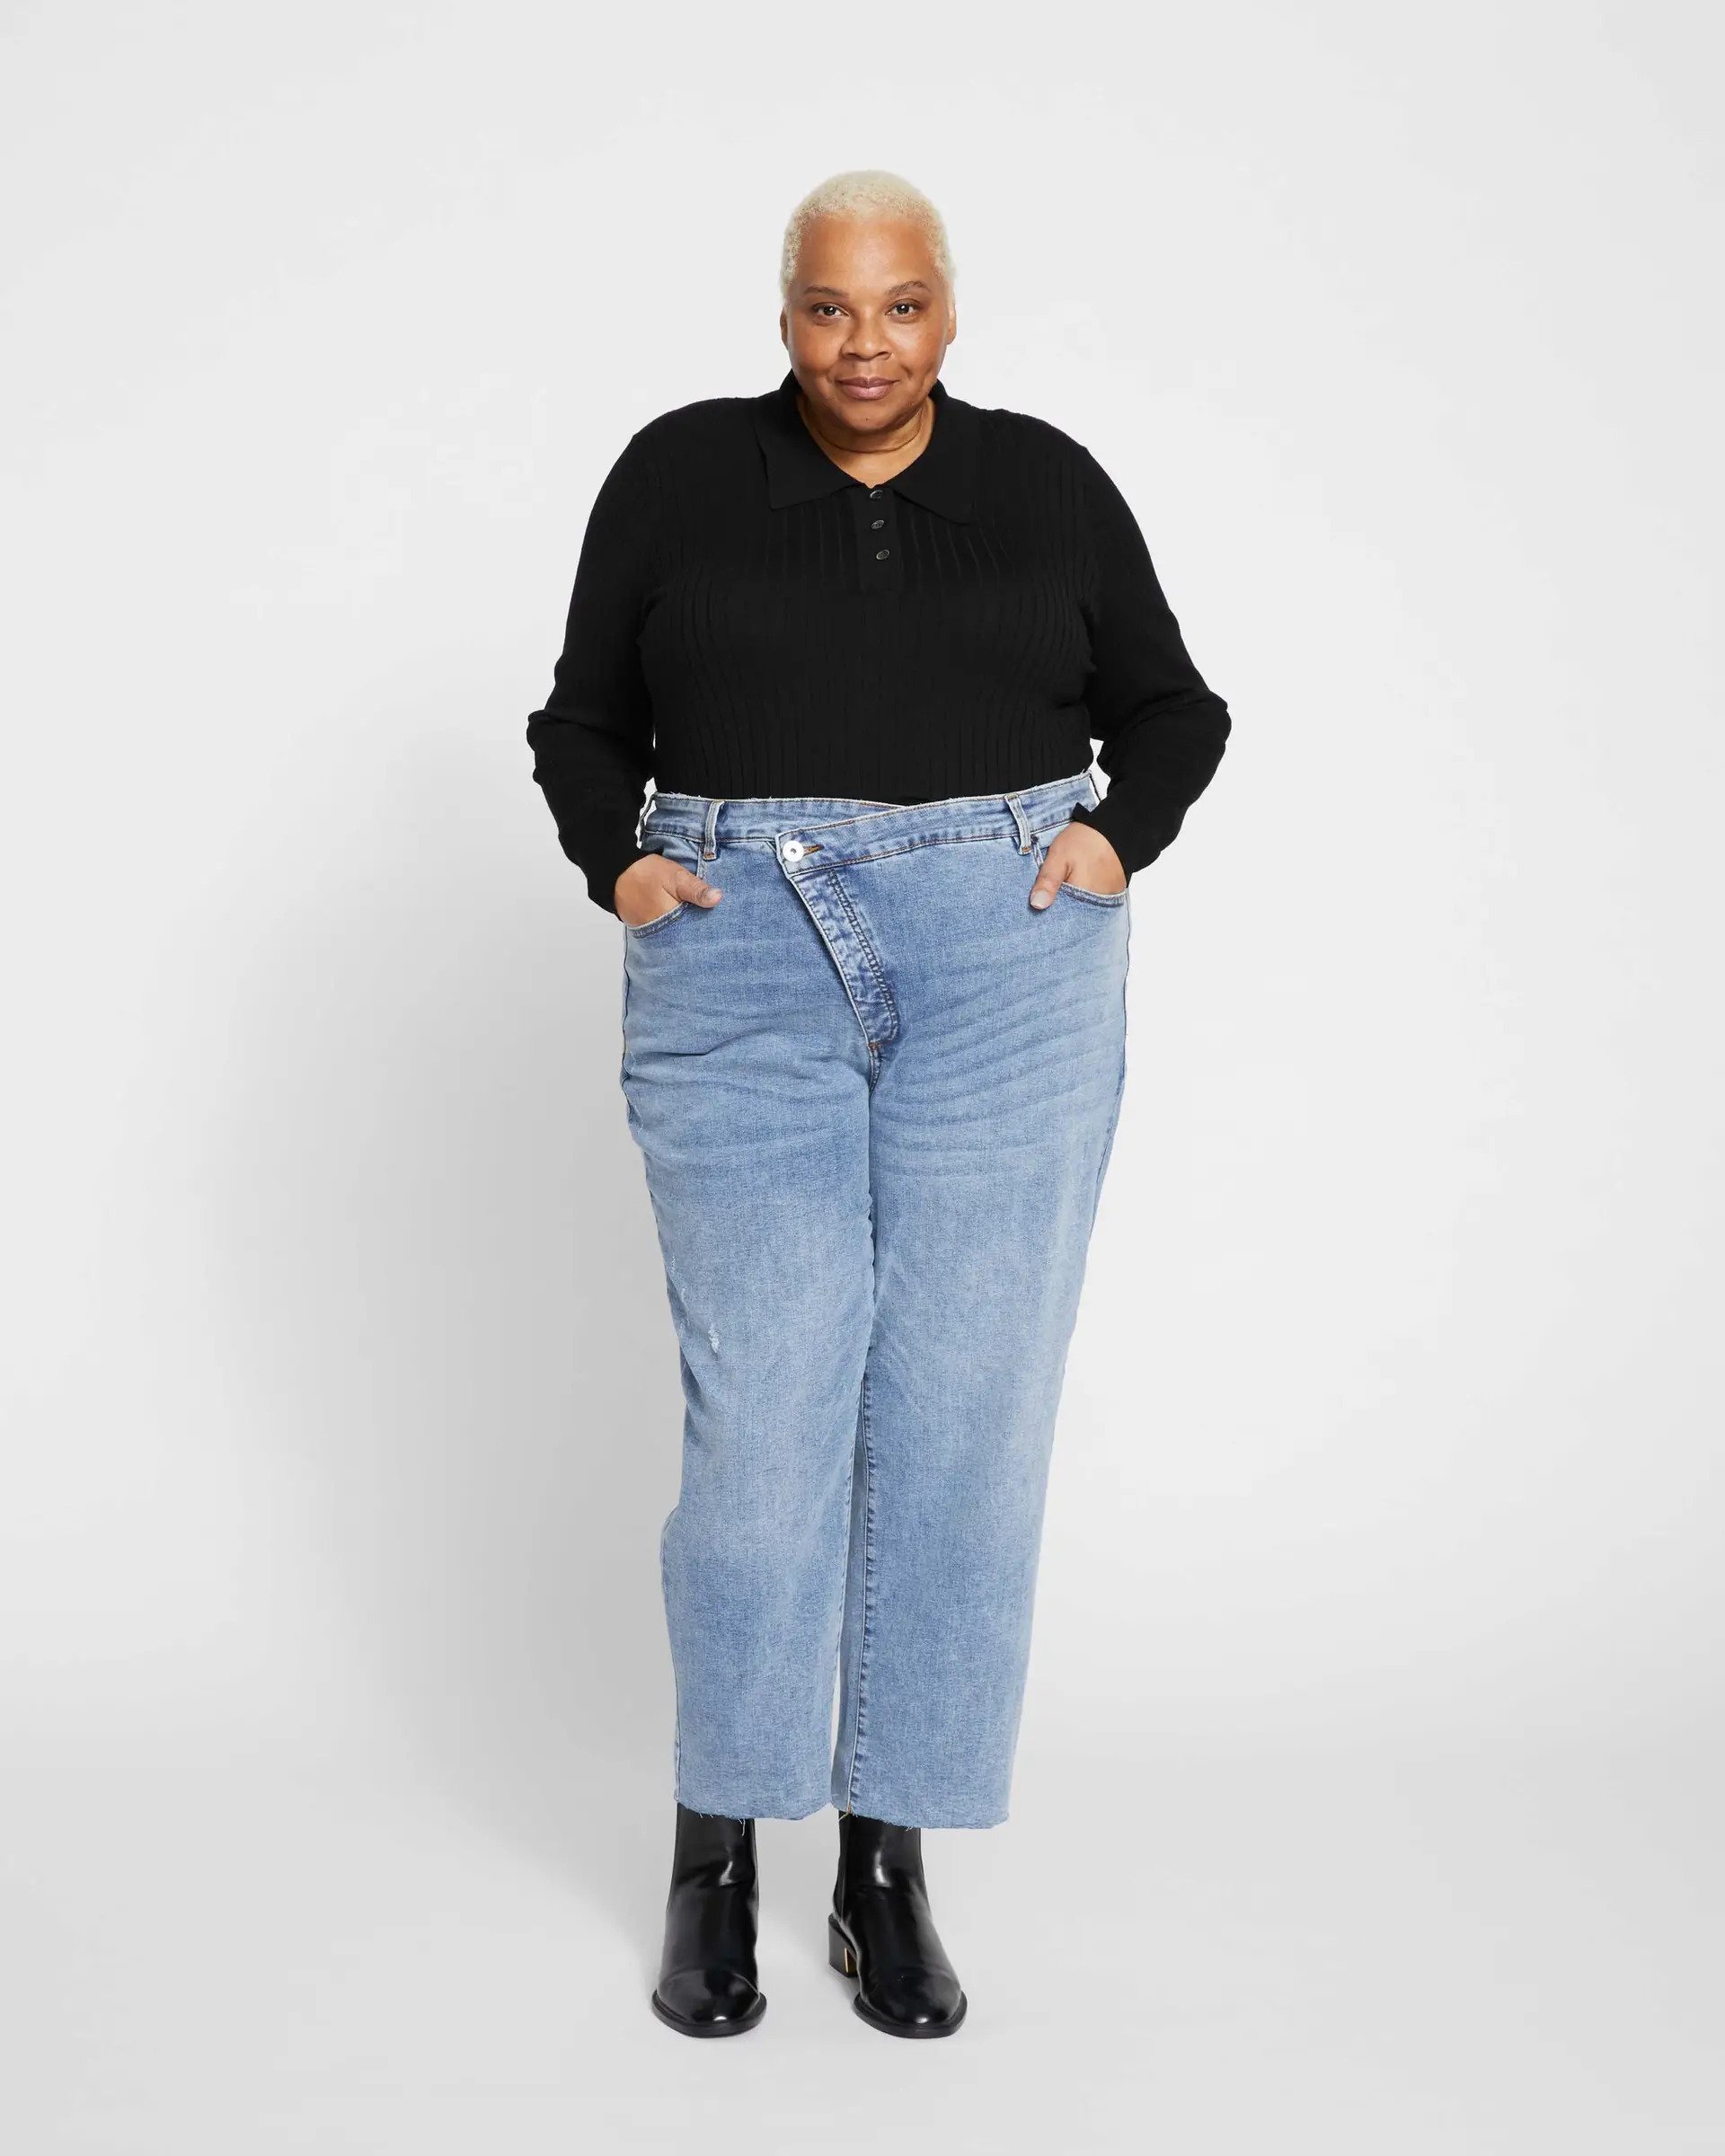  TESTING MOM  STRAIGHT LEG JEANS FOR CURVY THIGHS  TRY ON  COMPARE  MIDSIZE UK 121416 BODY  YouTube